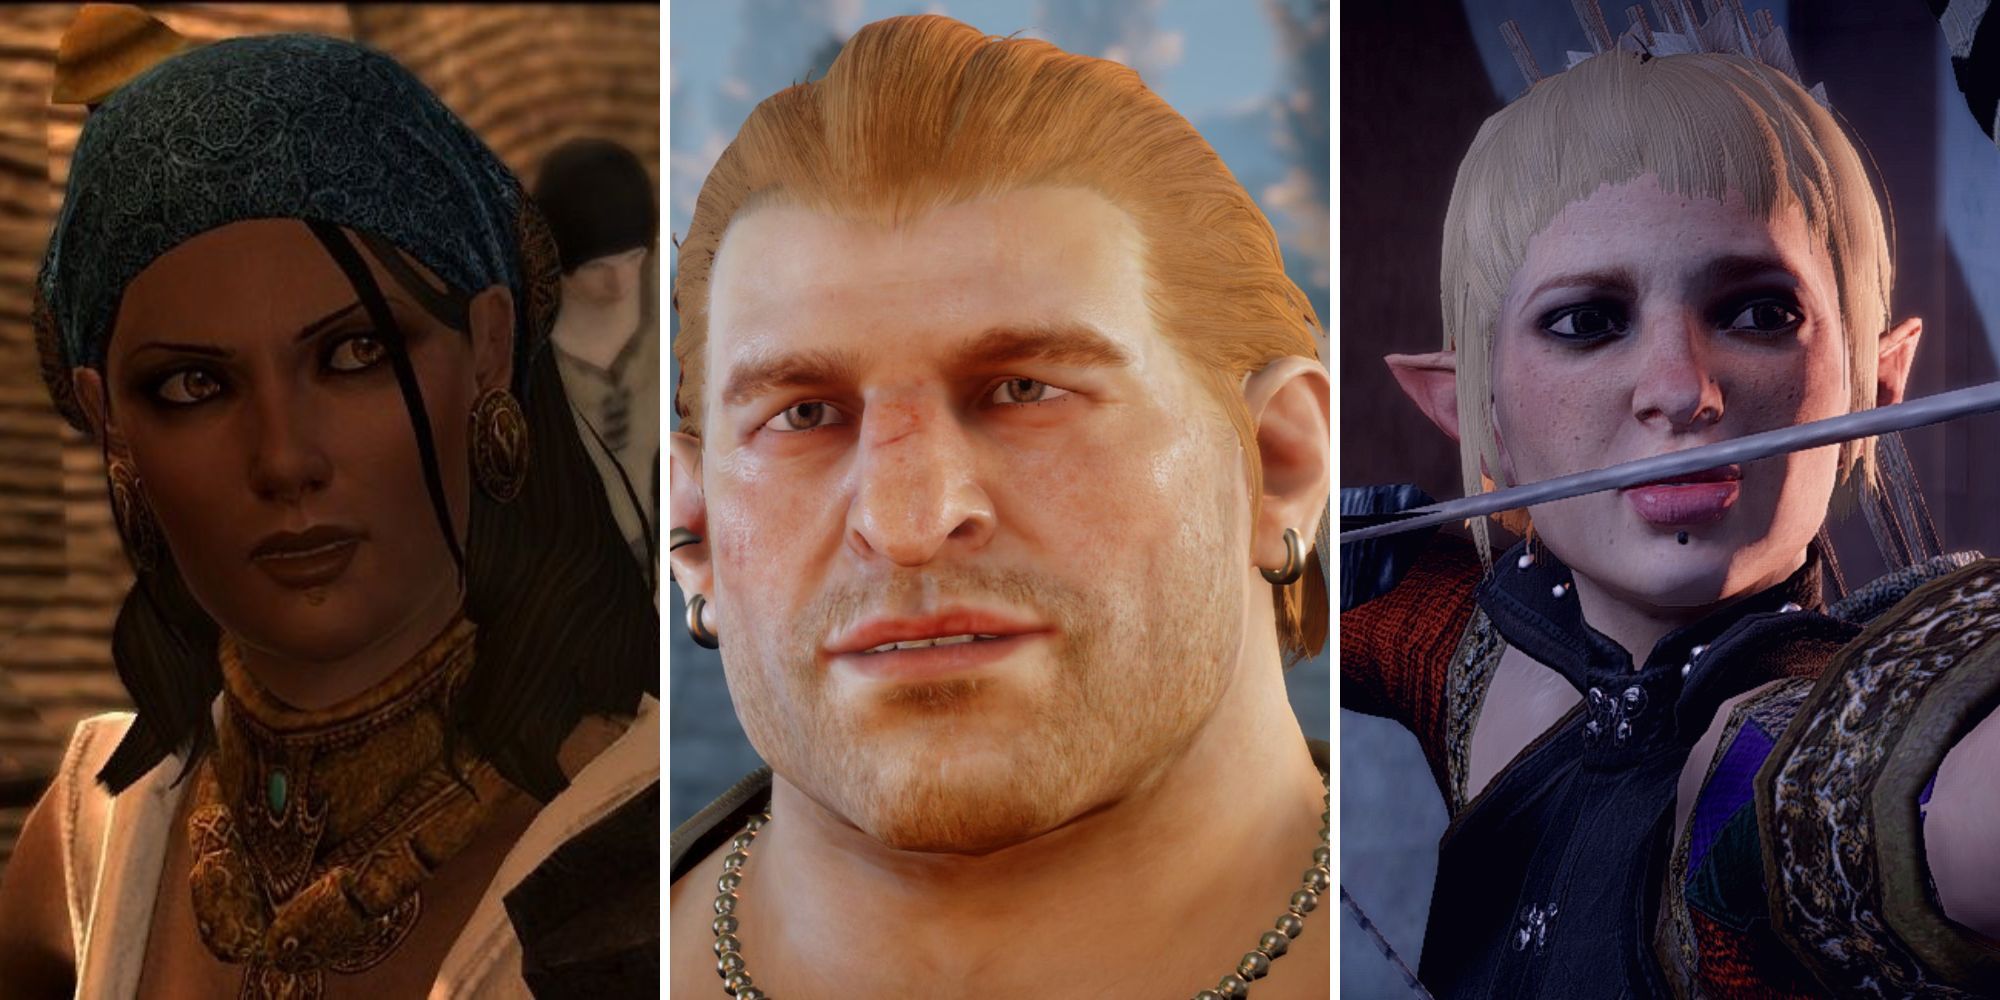 A grid showing close ups of the characters Isabela, Varric and Sera from Dragon Age 2 and Dragon Age: Inquisition